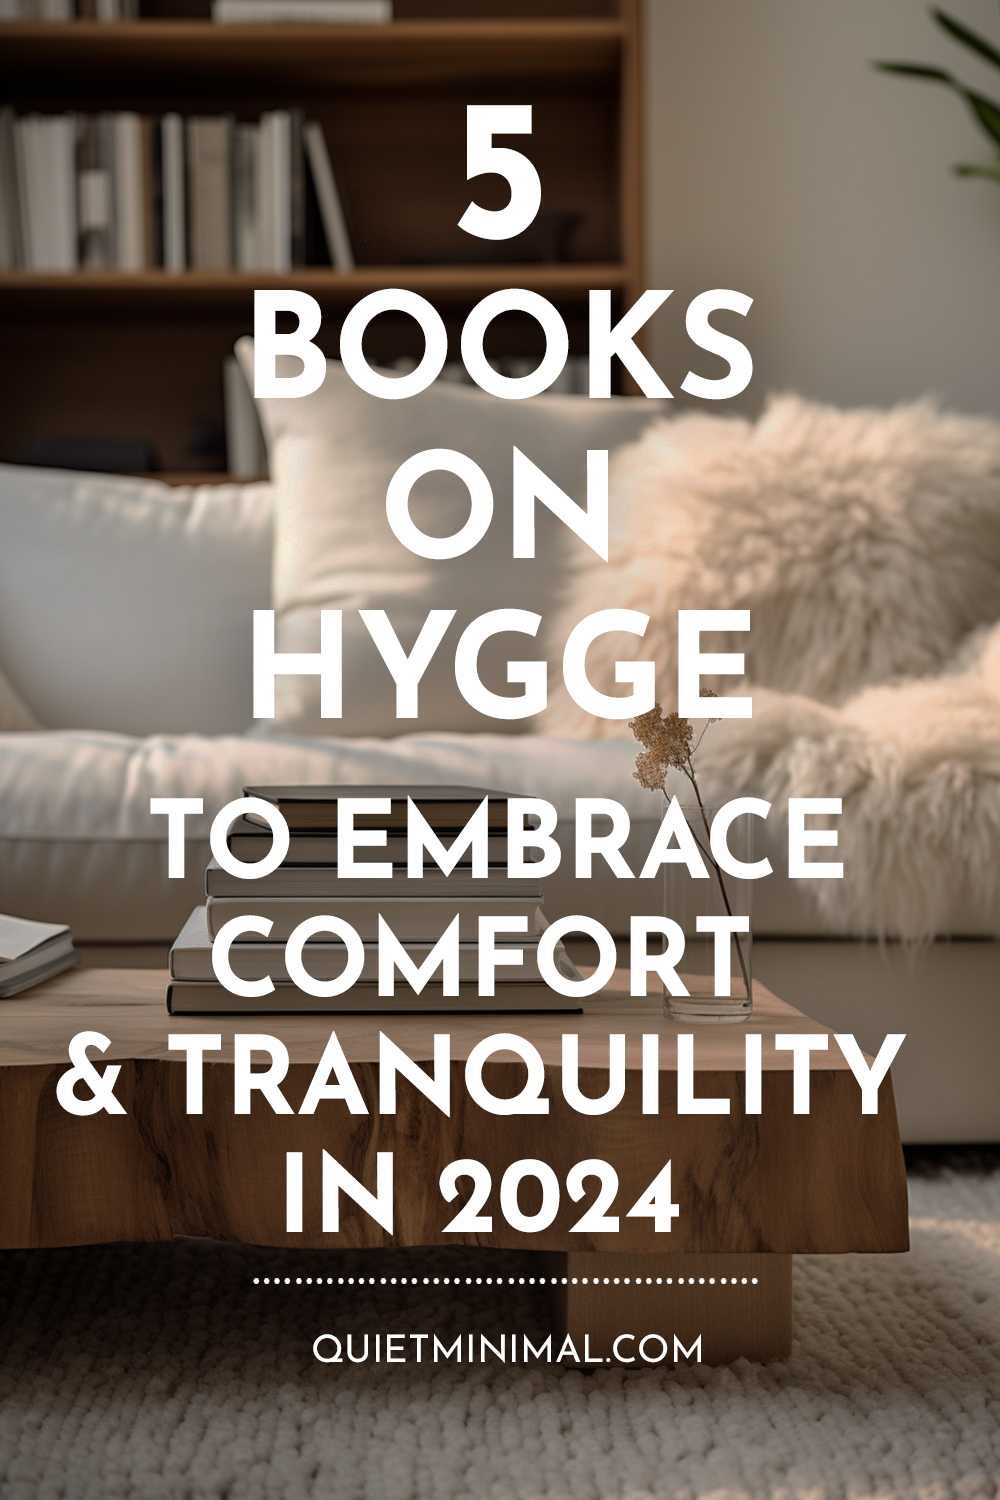 A cozy table where you can curl up with comfort and hygge, surrounded by books.